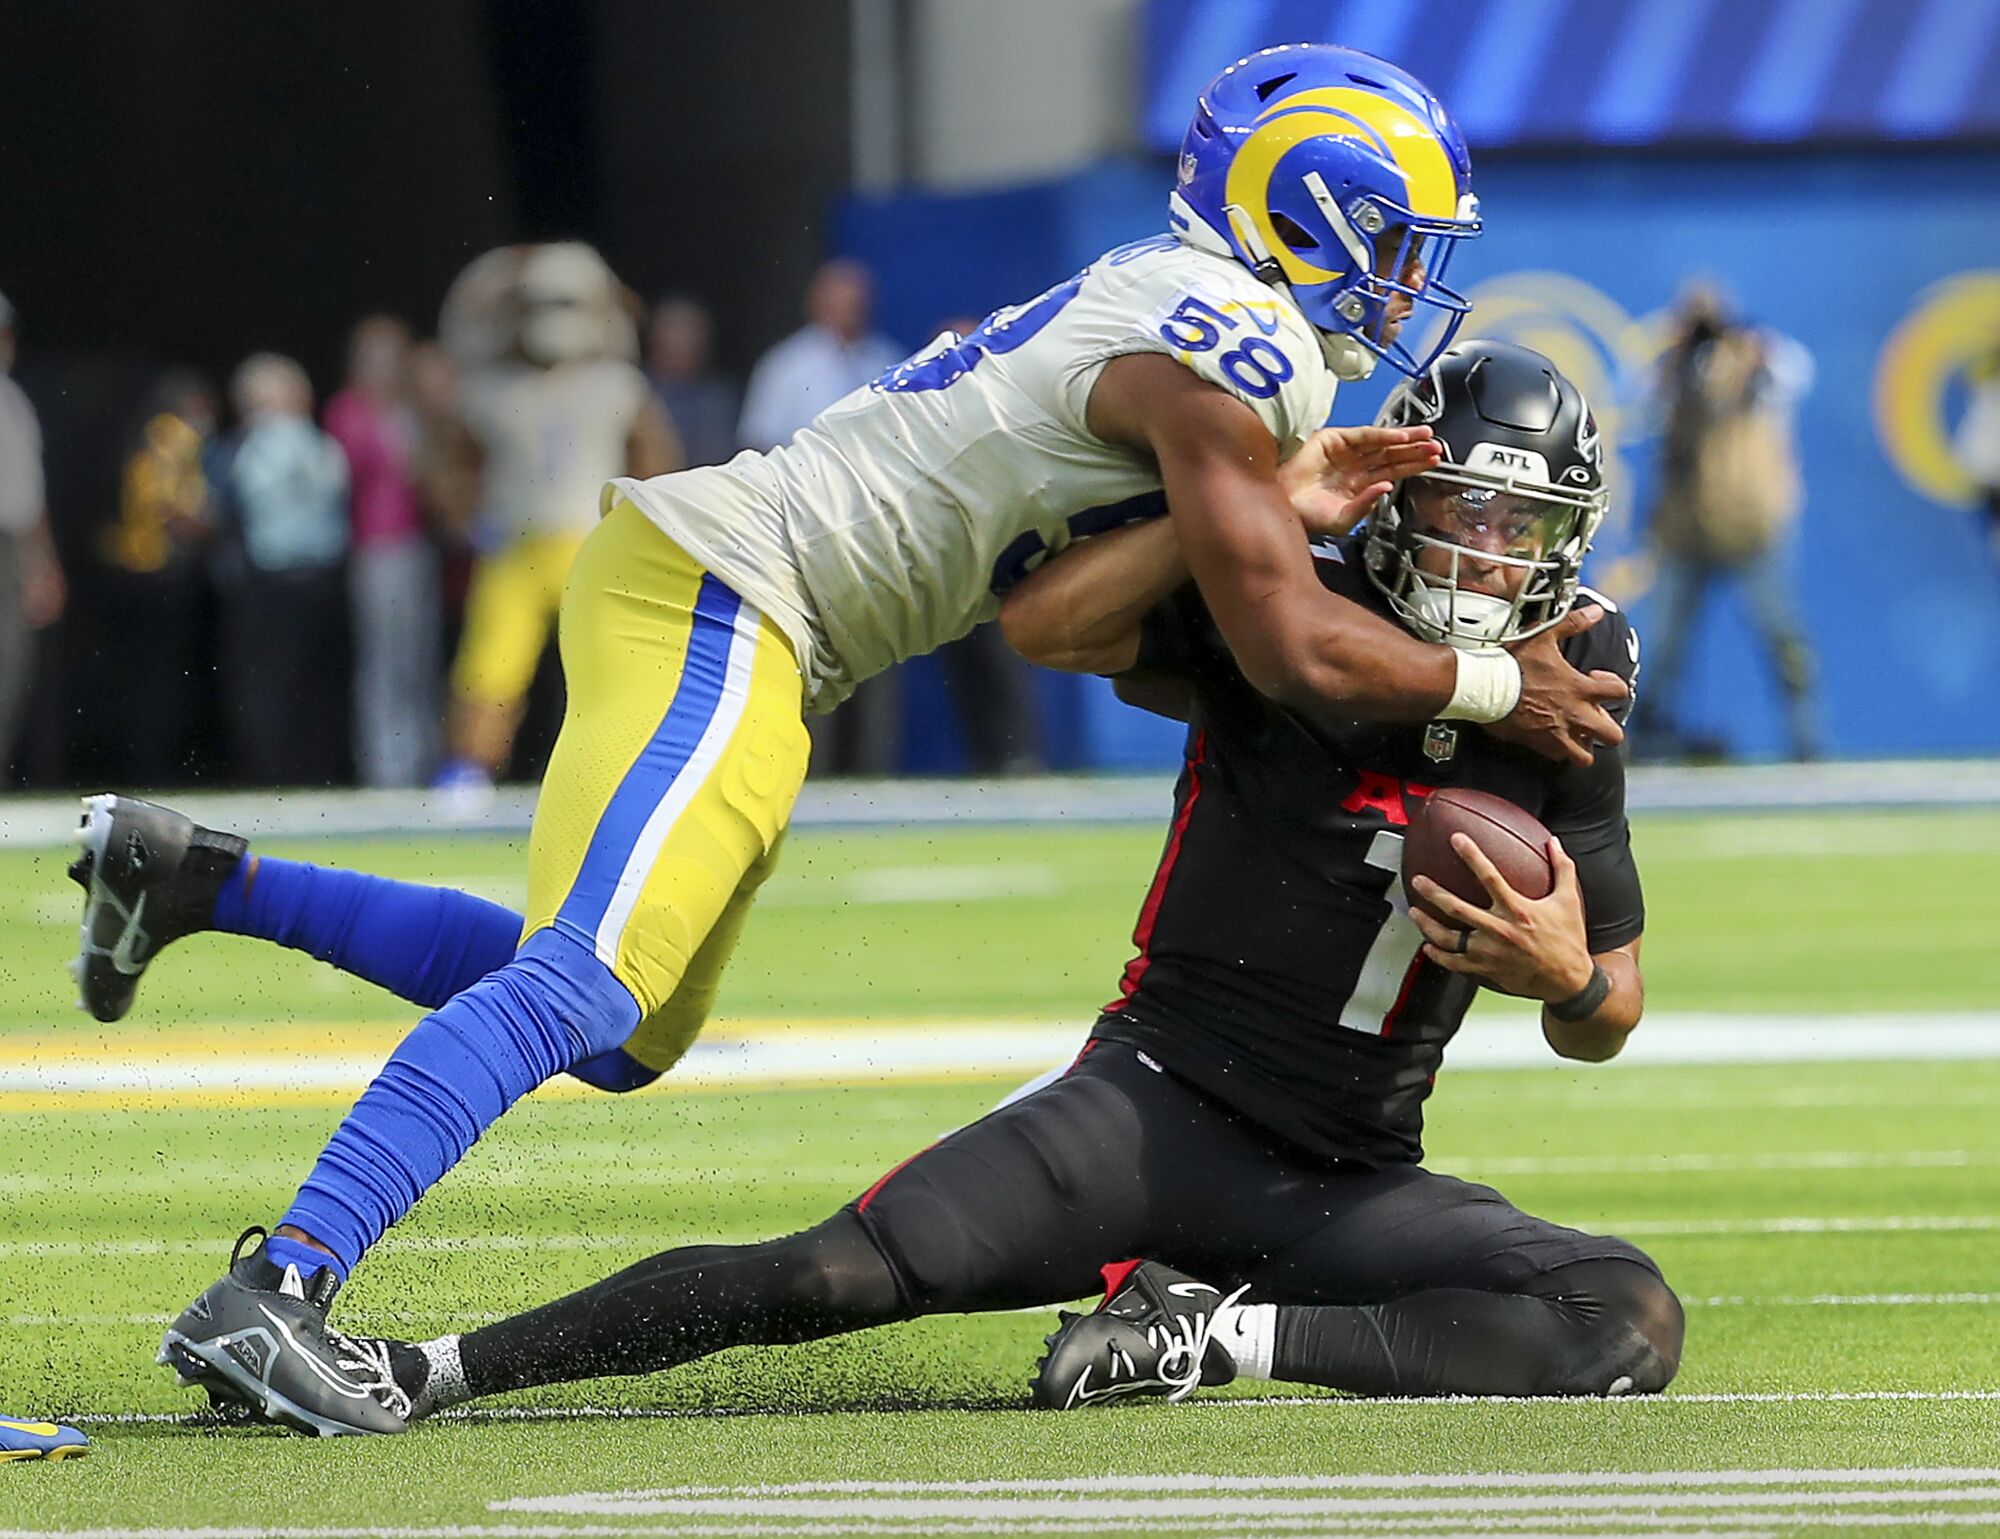 Rams defensive lineman Justin Hollins tackles Falcons quarterback Marcus Mariota late in the fourth quarter.